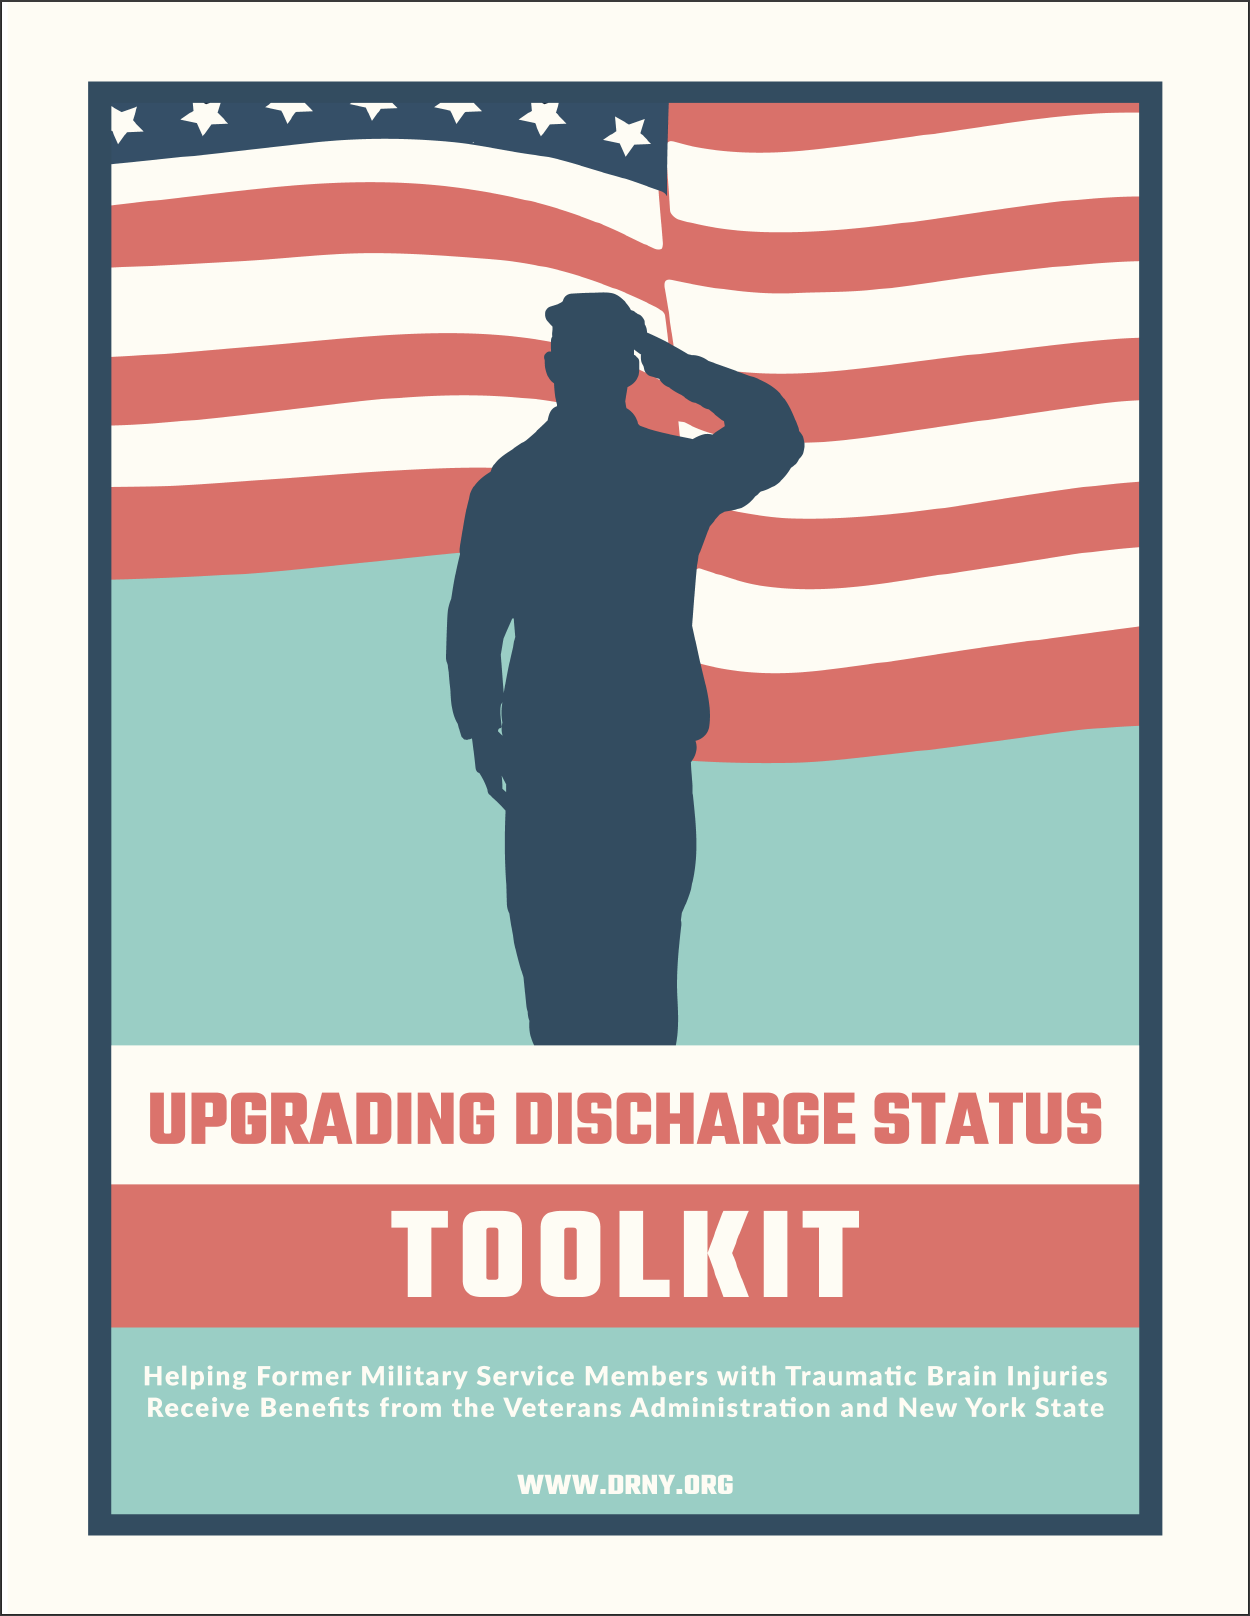 Uploaded Image: /vs-uploads/patbi/Military Toolkit Cover.png